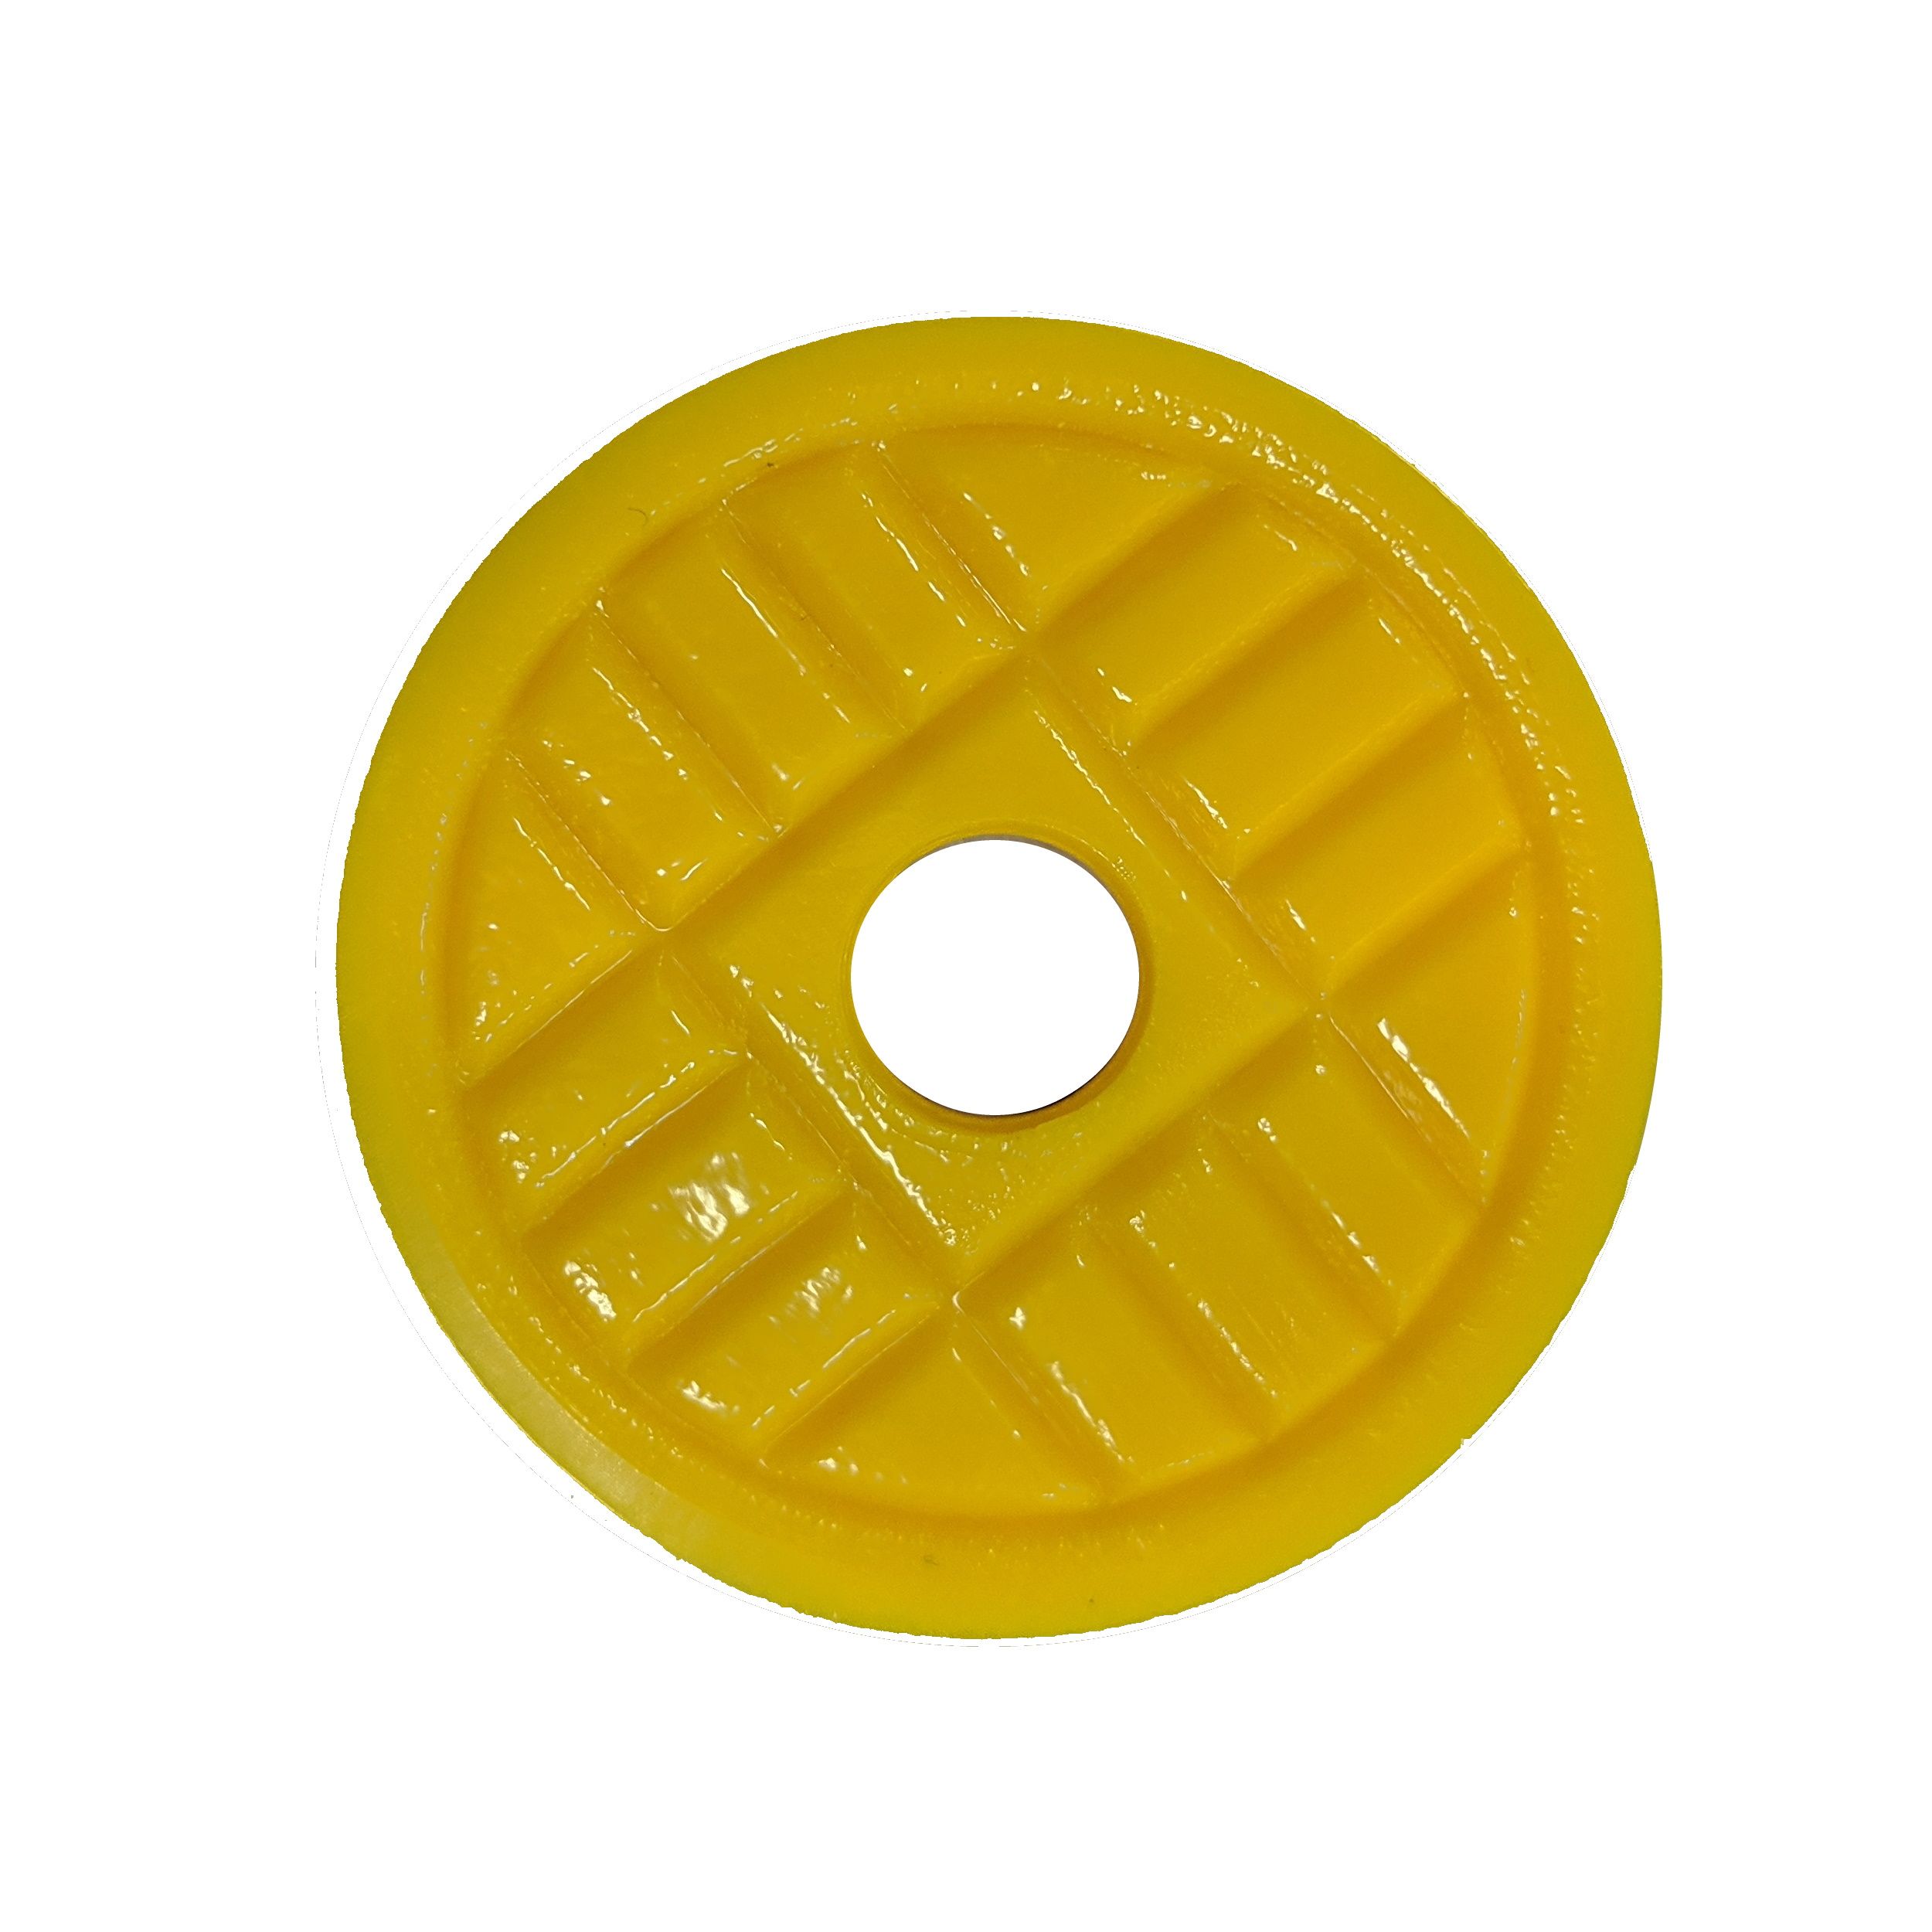 Myzox Survey Washer for Nail #2 & #3 - 20 Pack (Yellow)